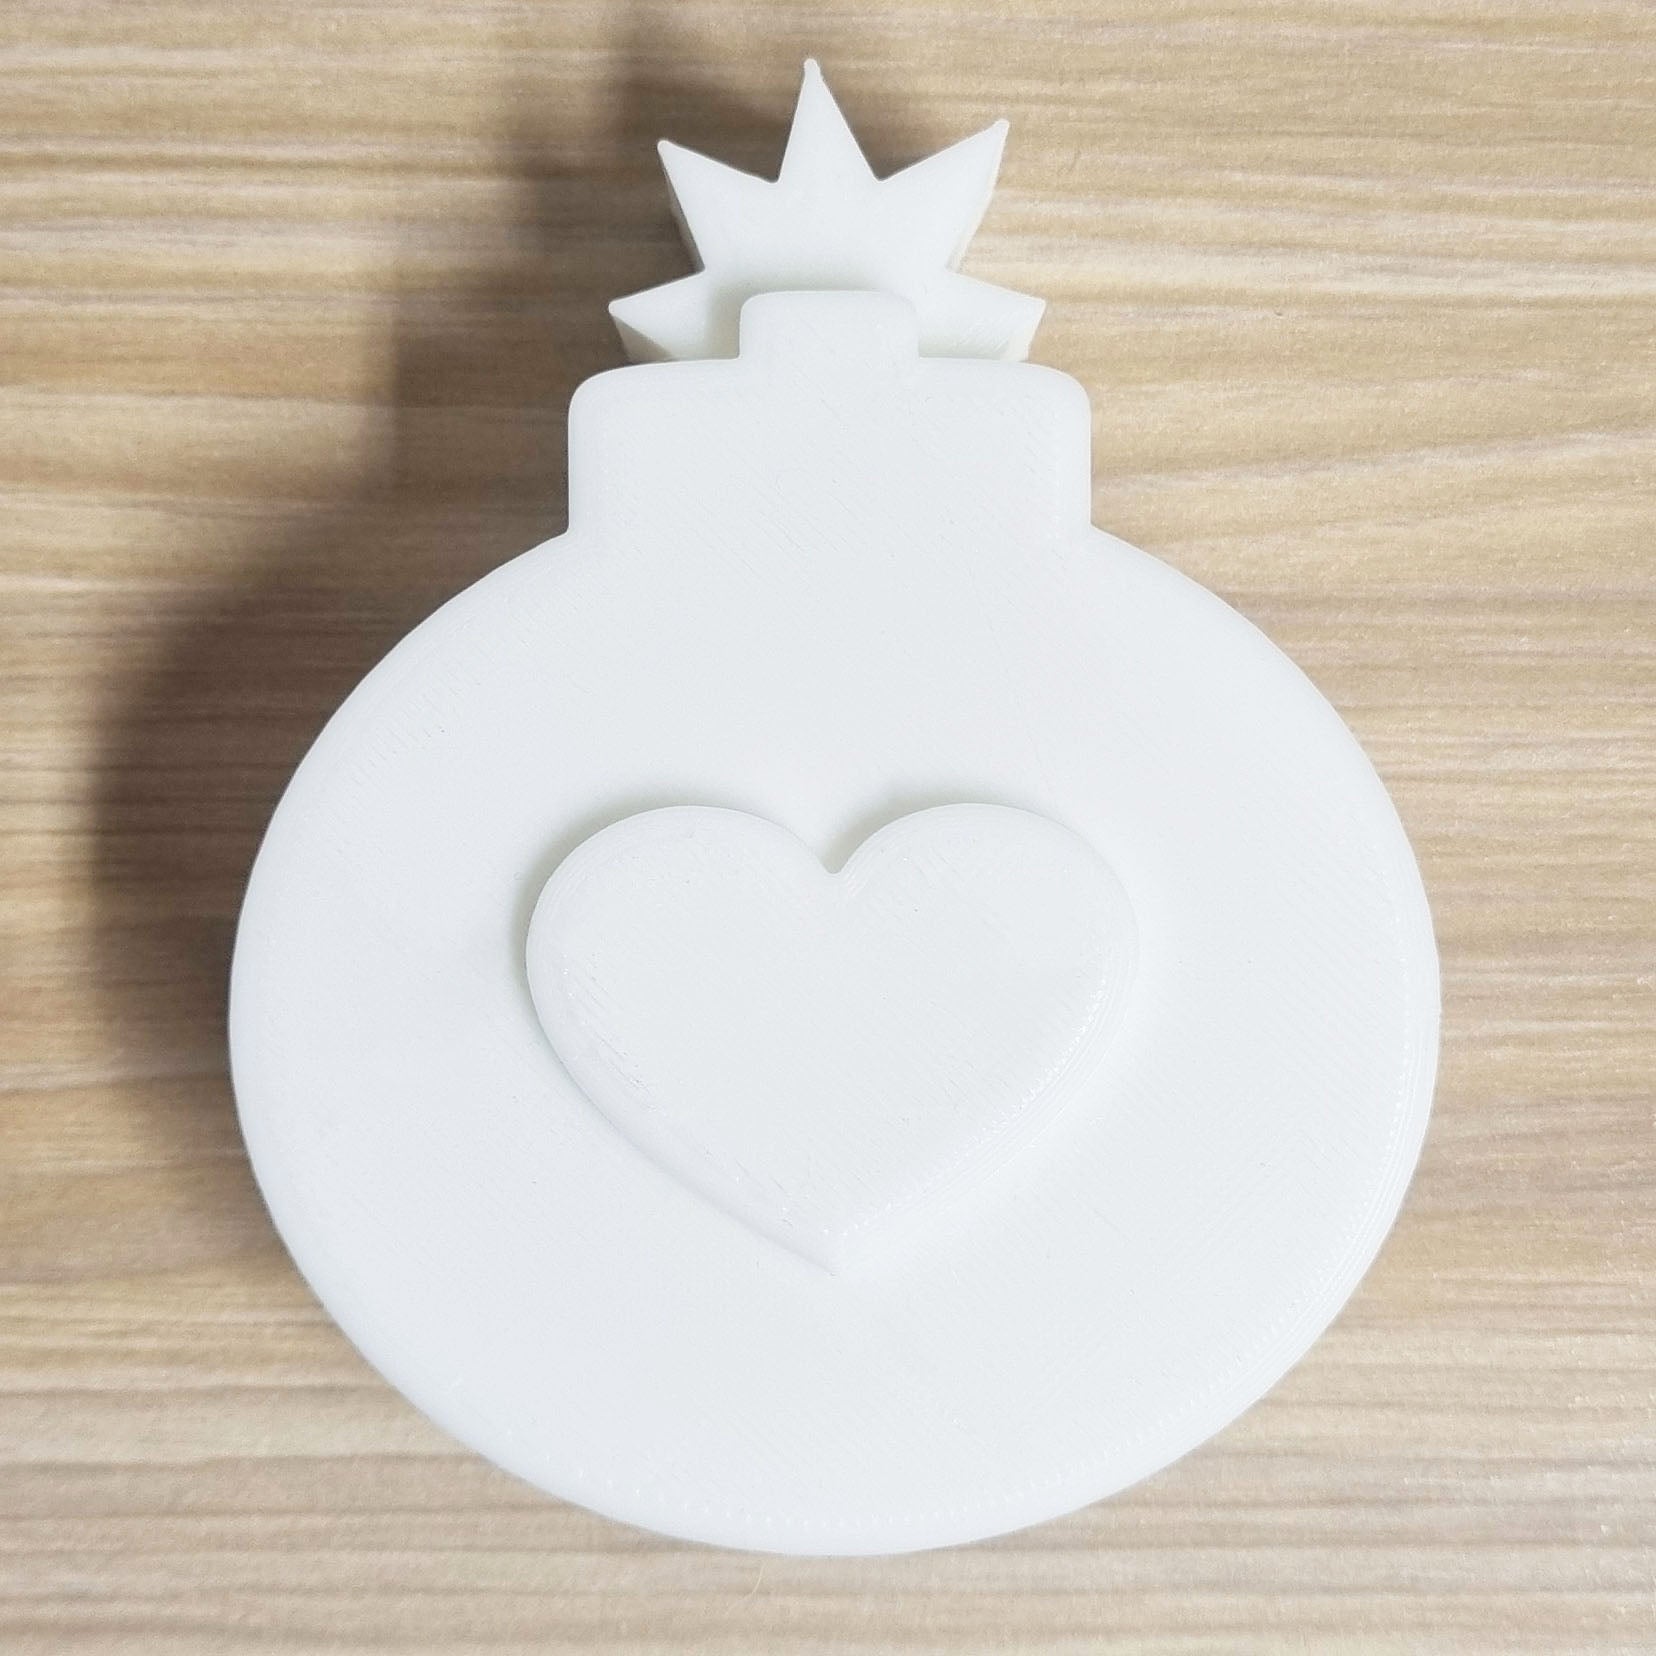 Love Bomb Mould | Truly Personal | Bath Bomb, Soap, Resin, Chocolate, Jelly, Wax Melts Mold